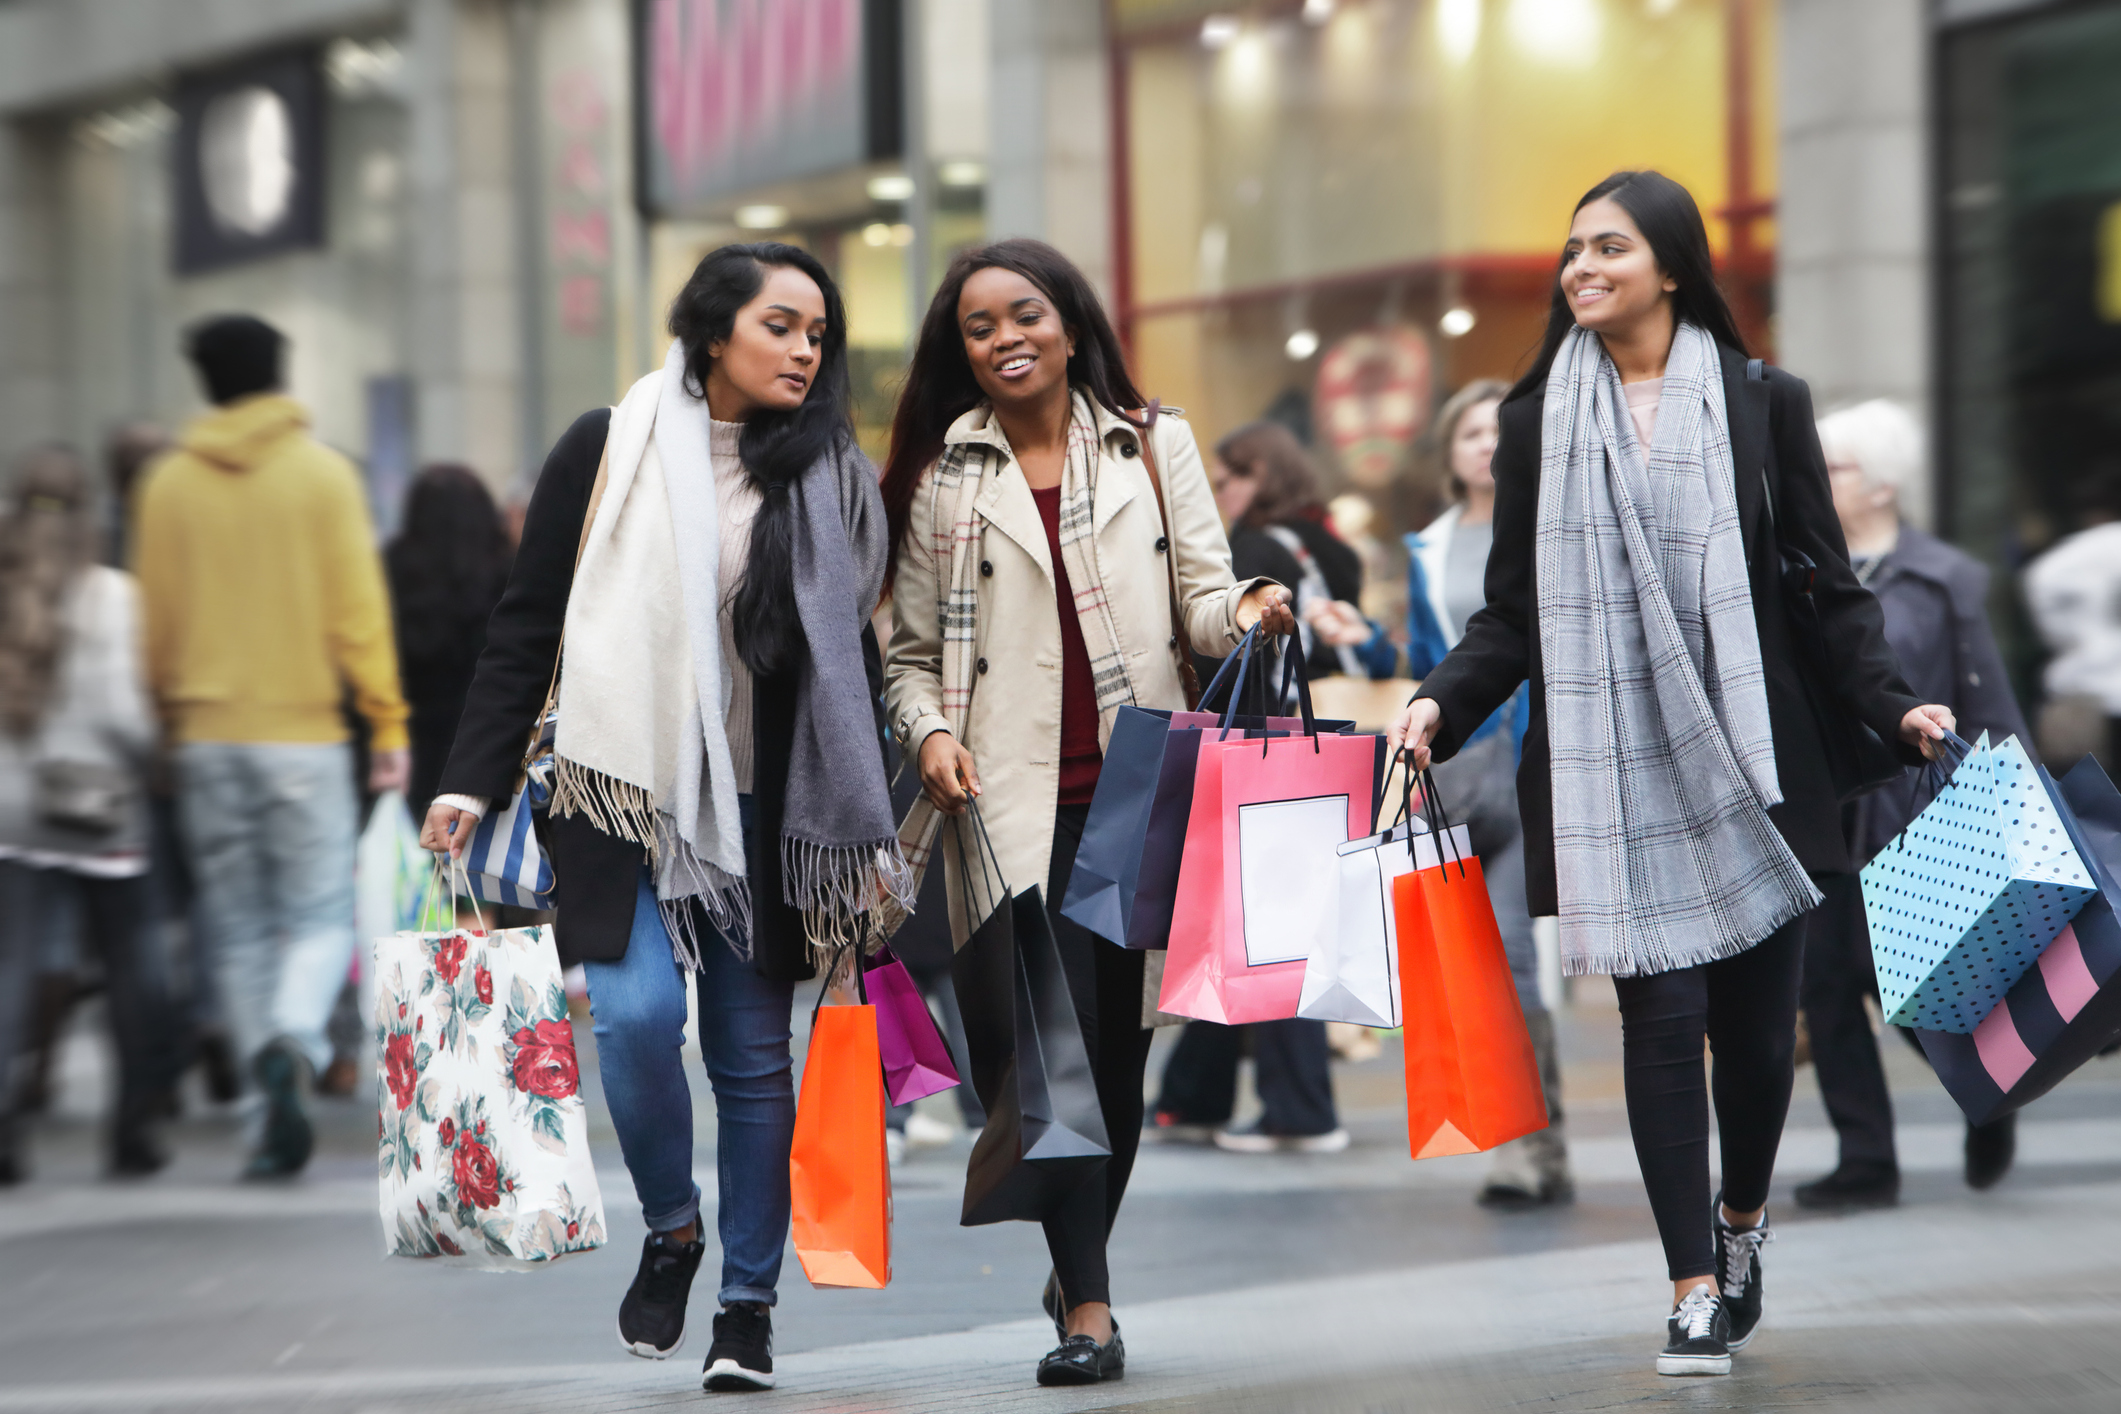 Women holding shopping bags on a shopping spree using their credit cards